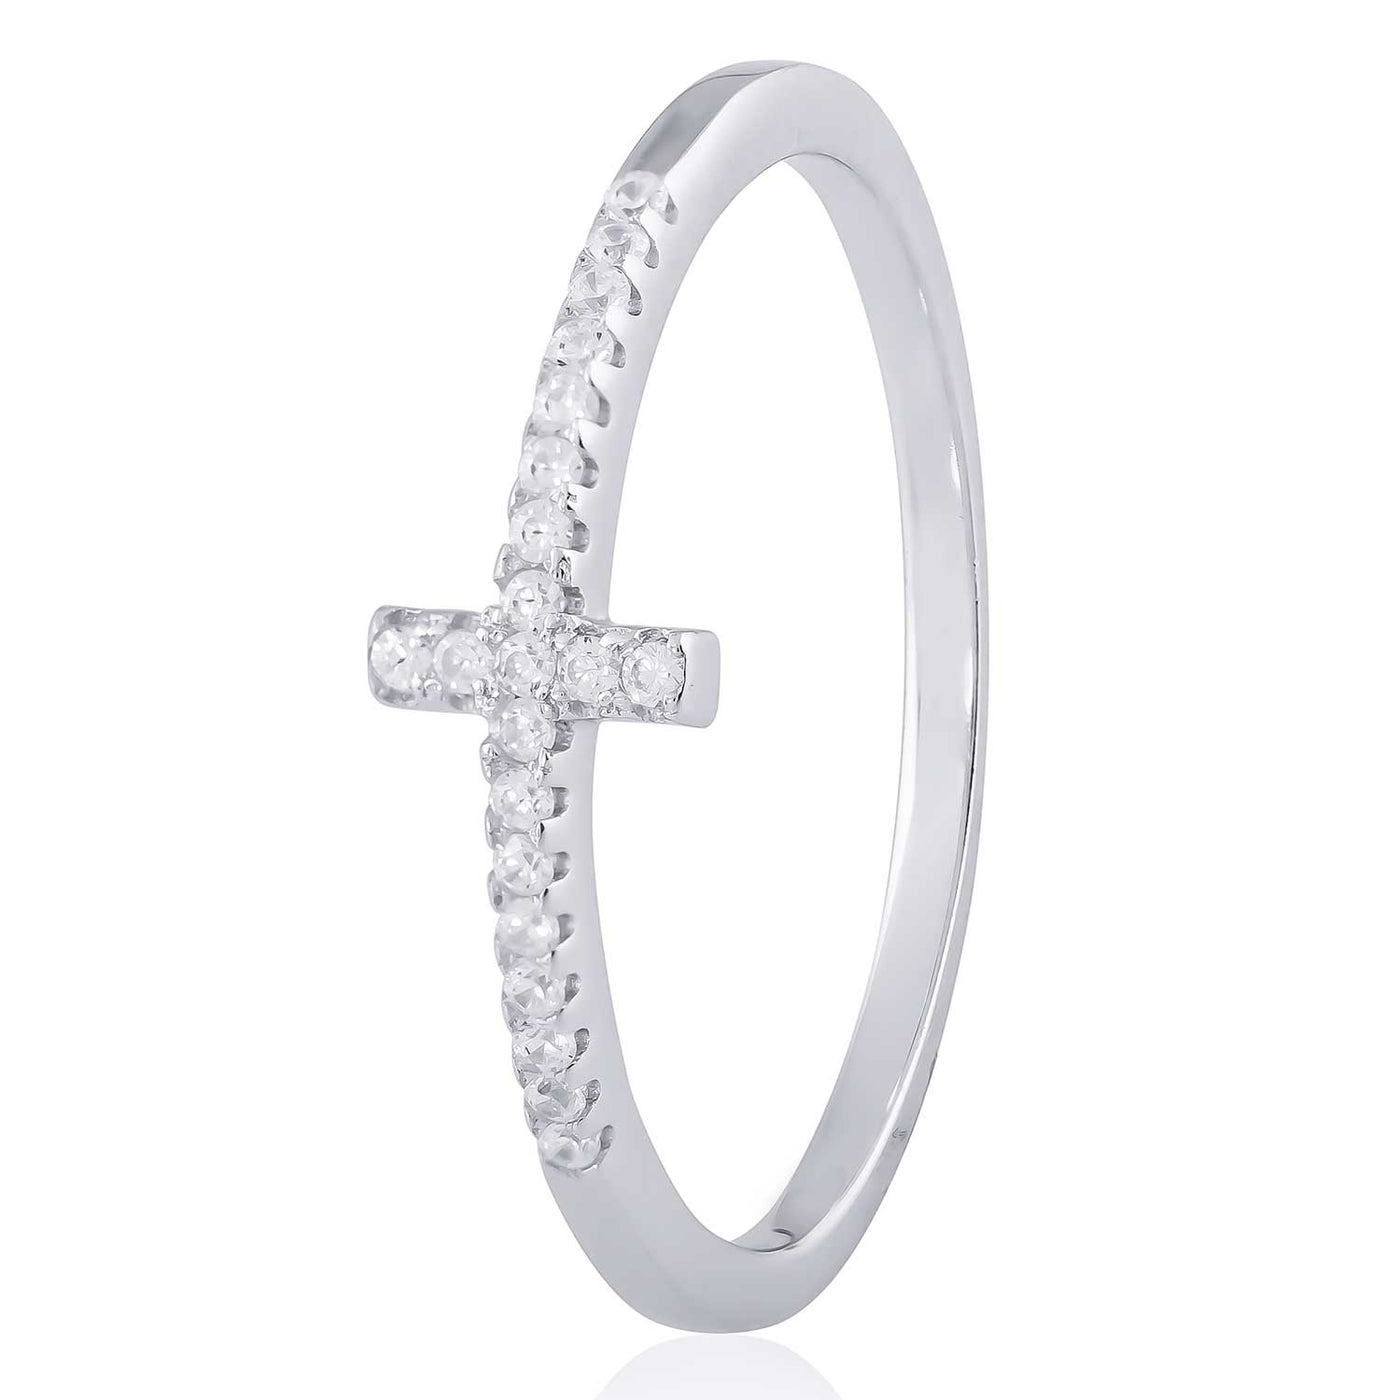 Rhodium Plated Sterling Silver Cross CZ Ring